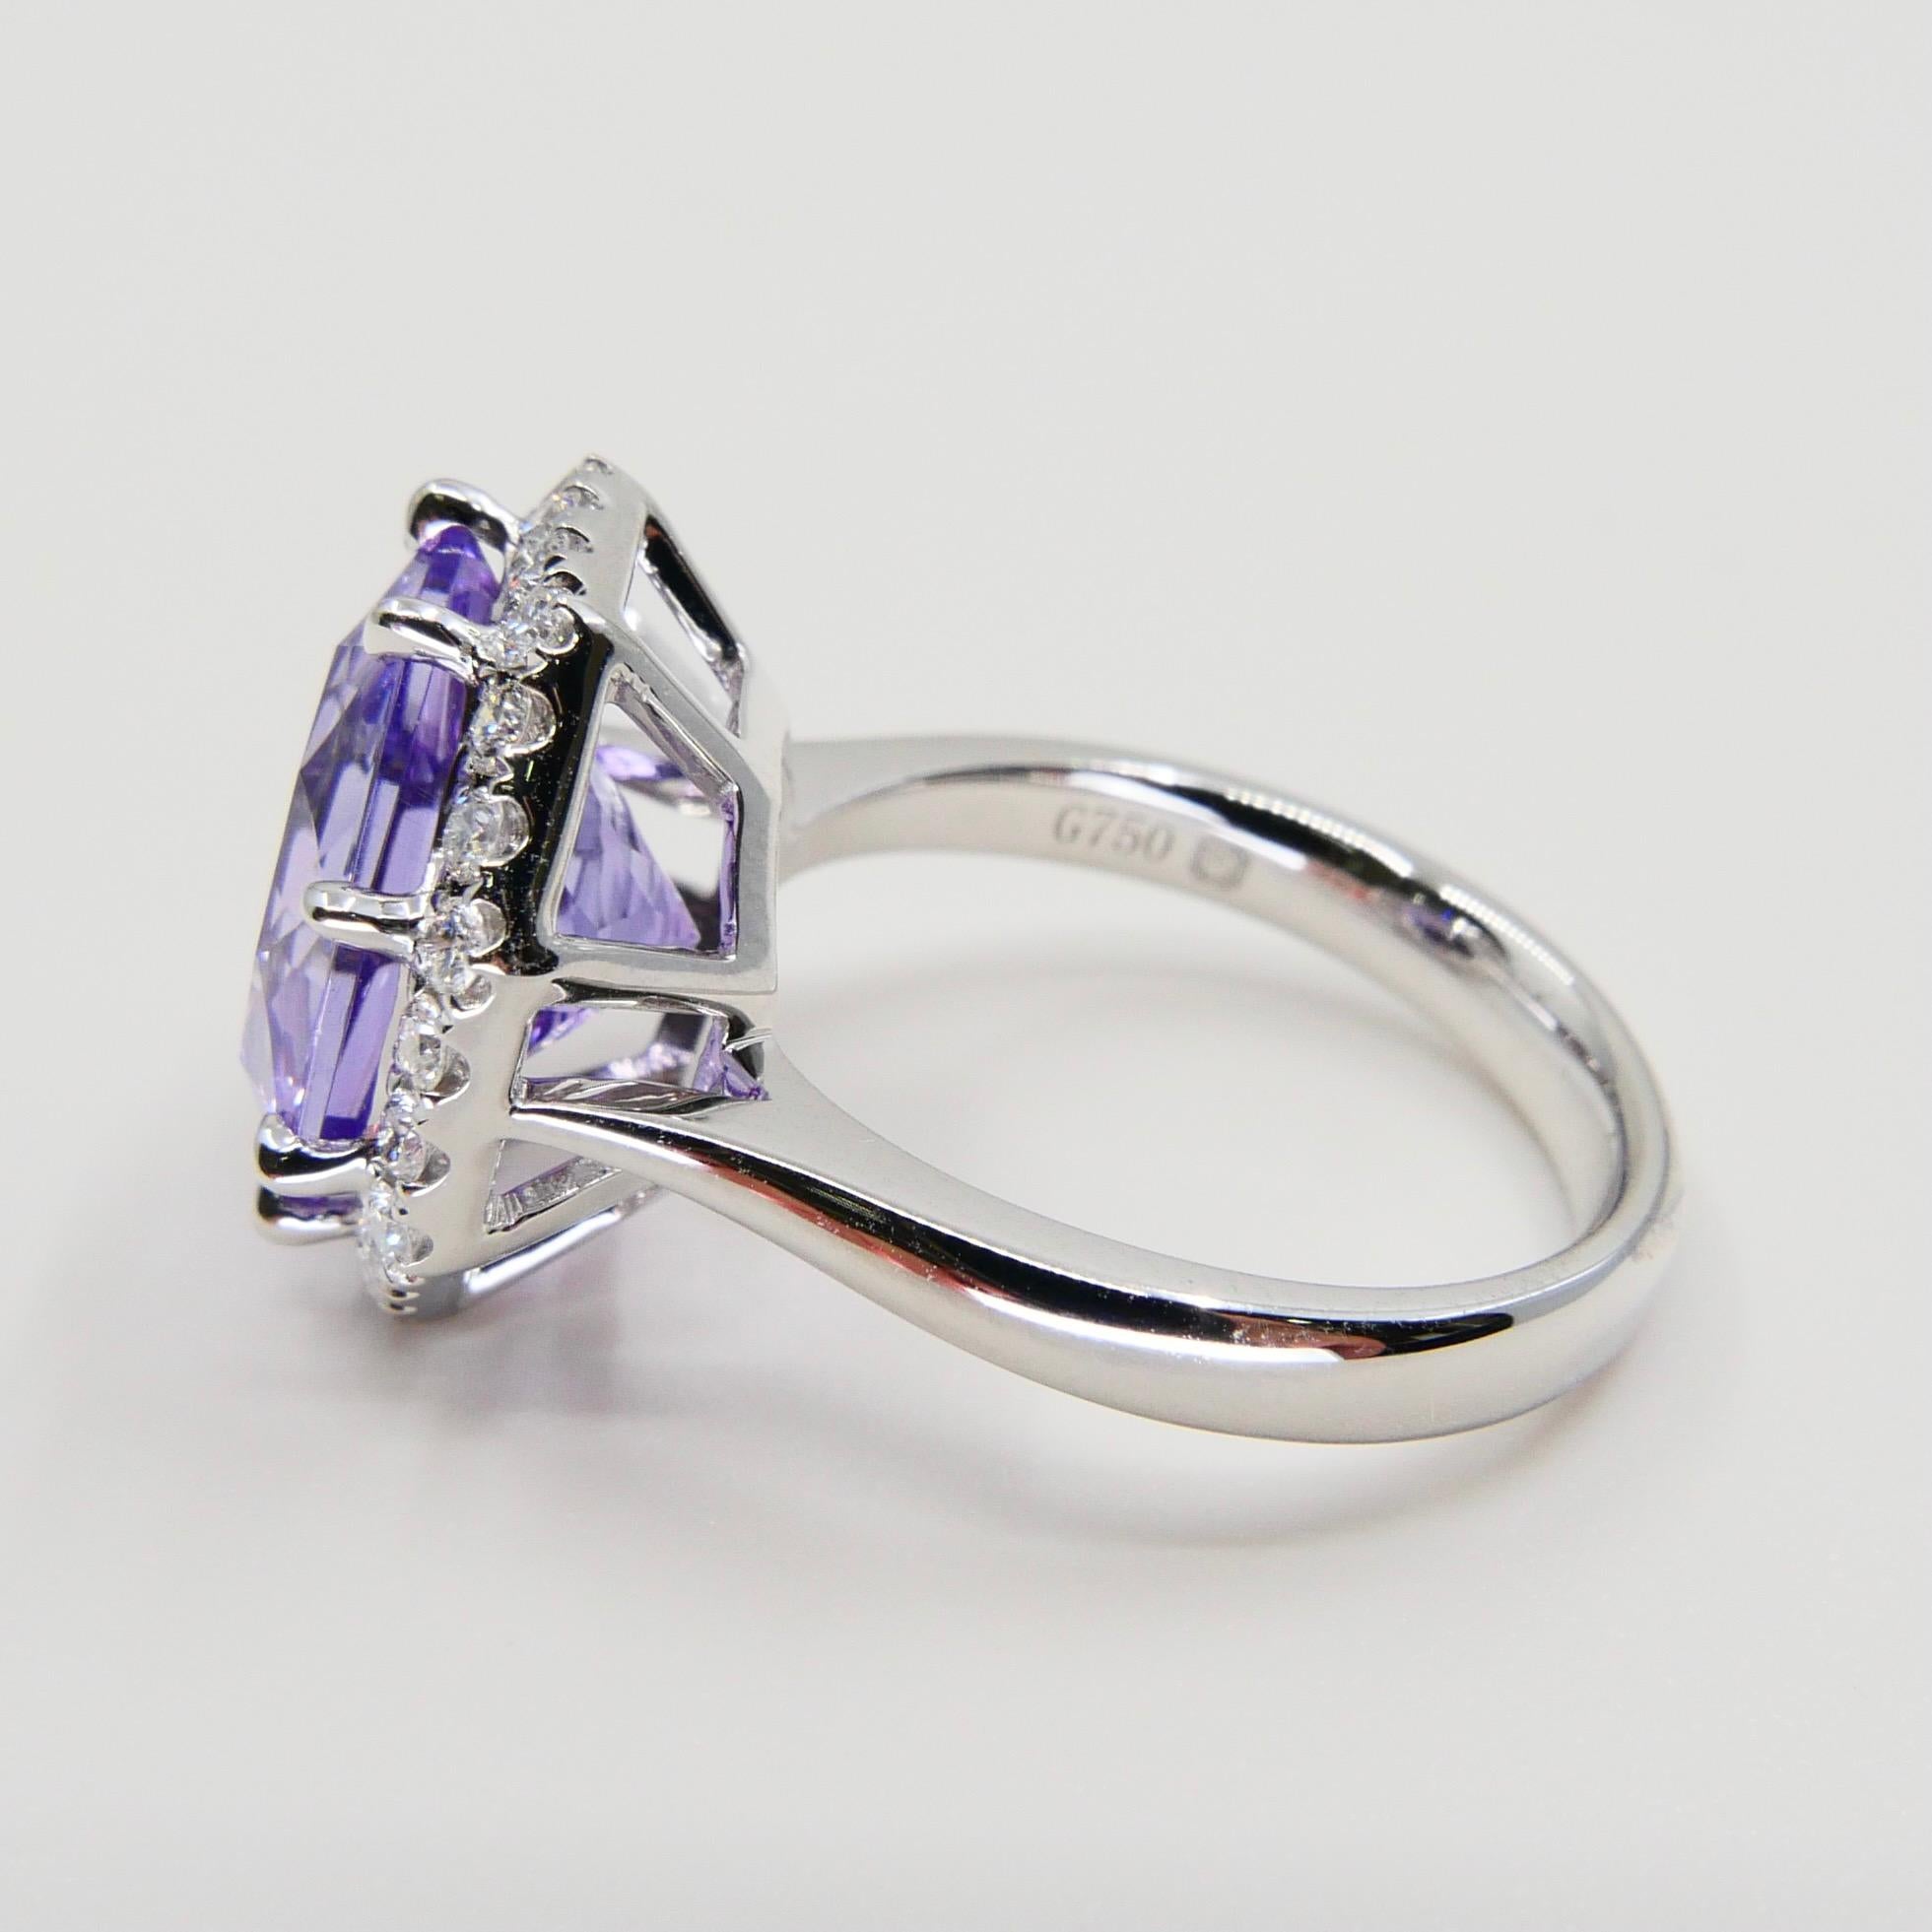 5.32 Carat Flower Cut Amethyst and Diamond Cocktail Ring, Statement Ring 4